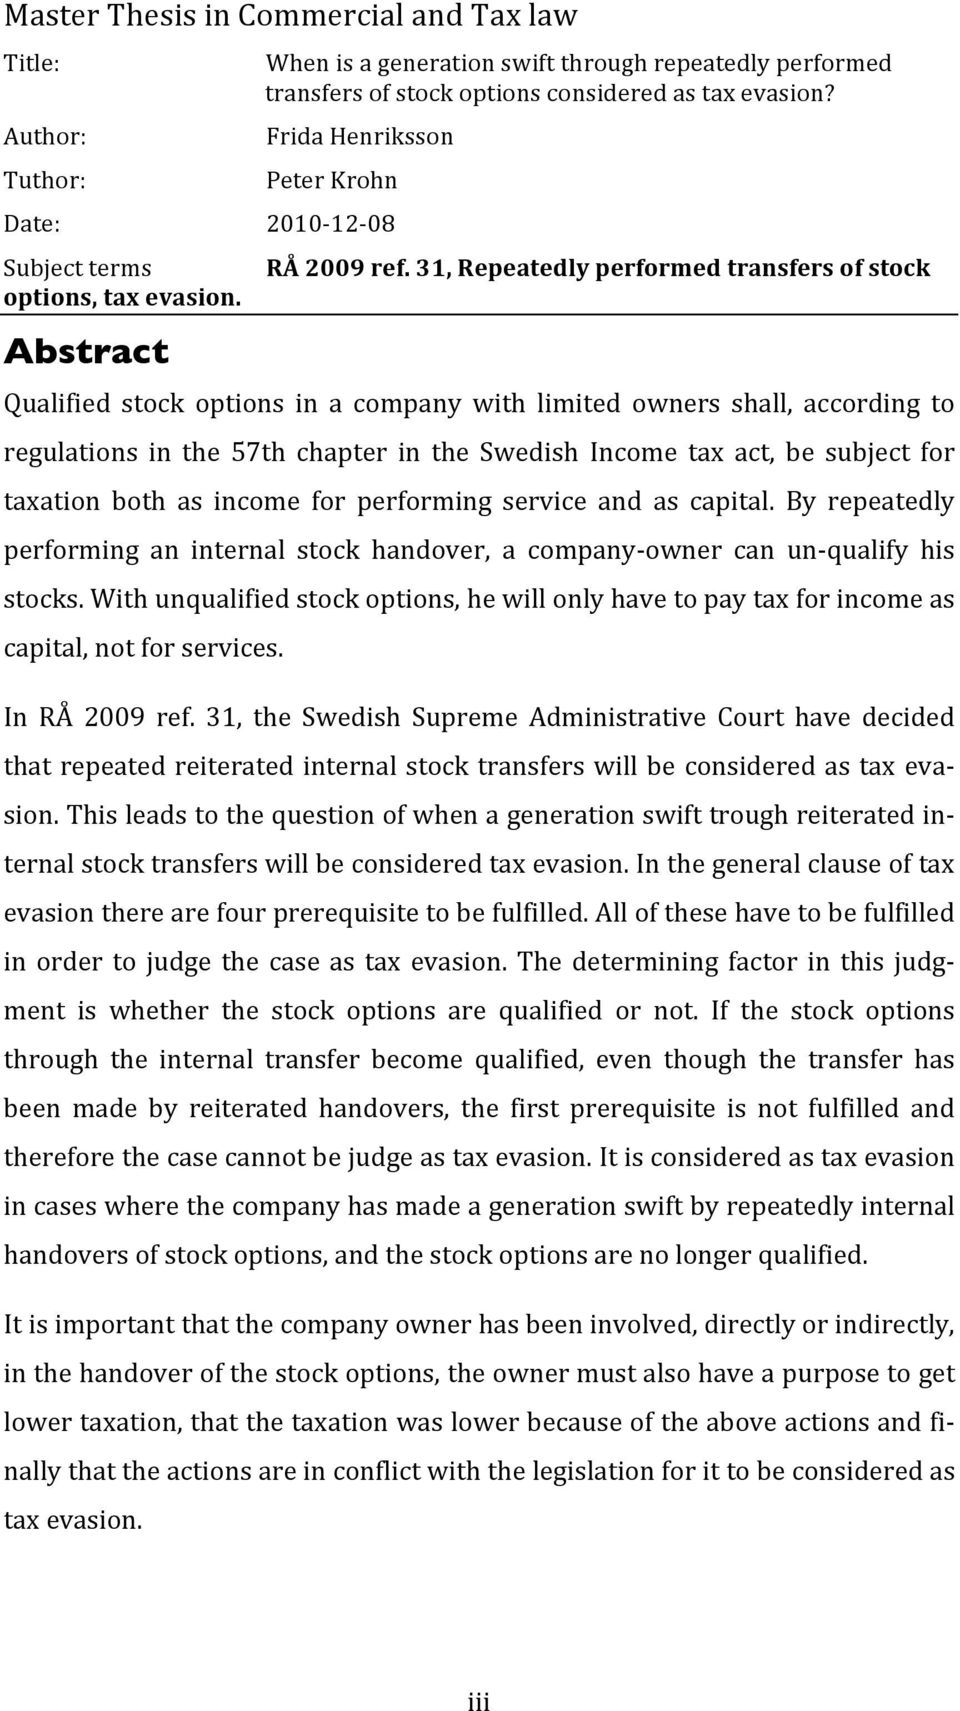 31, Repeatedly performed transfers of stock Qualified stock options in a company with limited owners shall, according to regulations in the 57th chapter in the Swedish Income tax act, be subject for